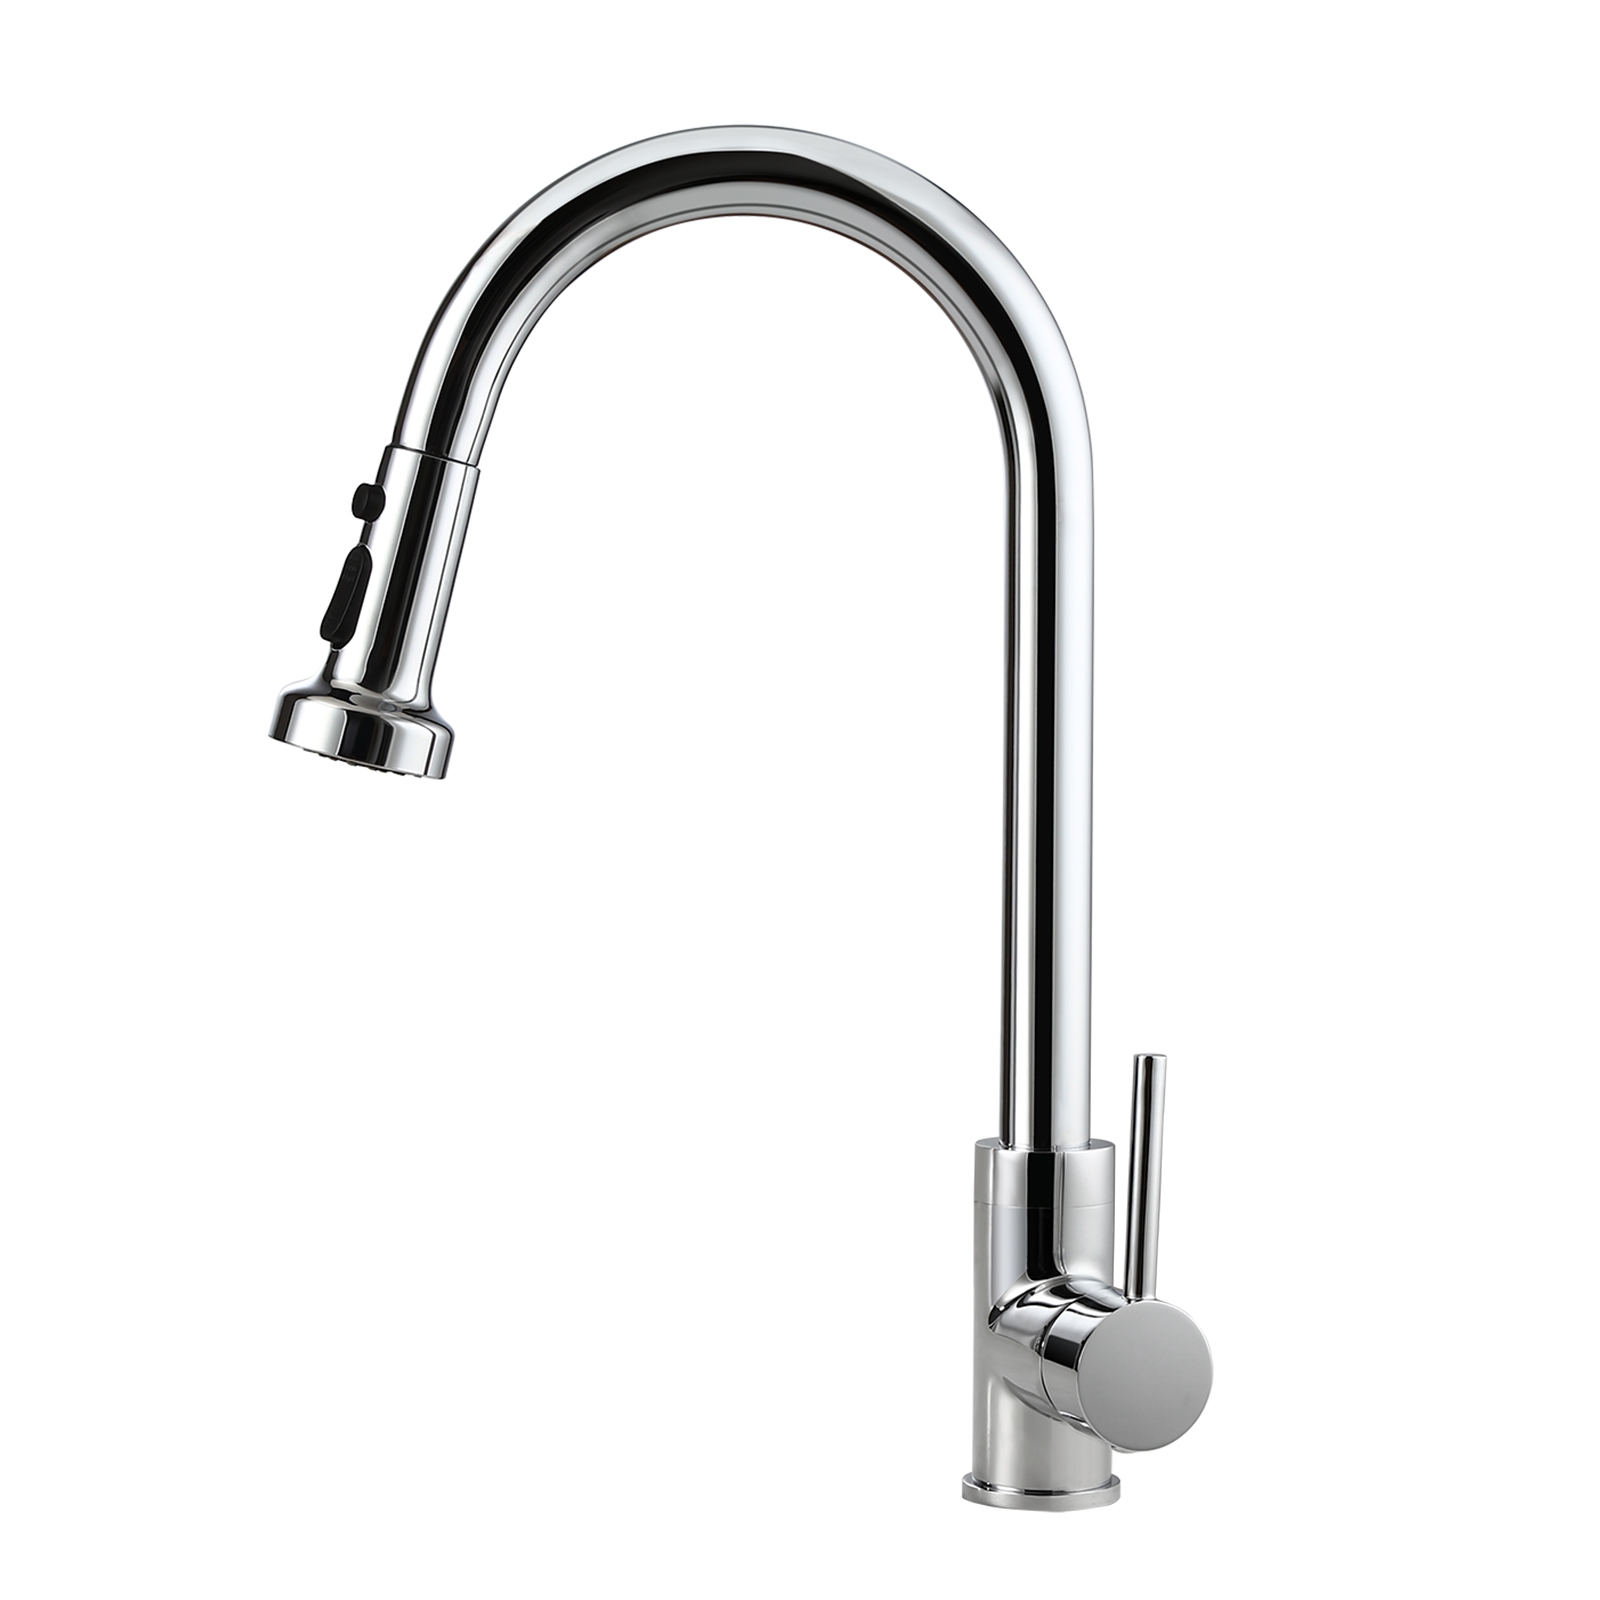 Commercial 3-Function Pull Down Spray Swivel Sprayhead Kitchen Sink Faucet with Deck Plate Polished Chrome Brass